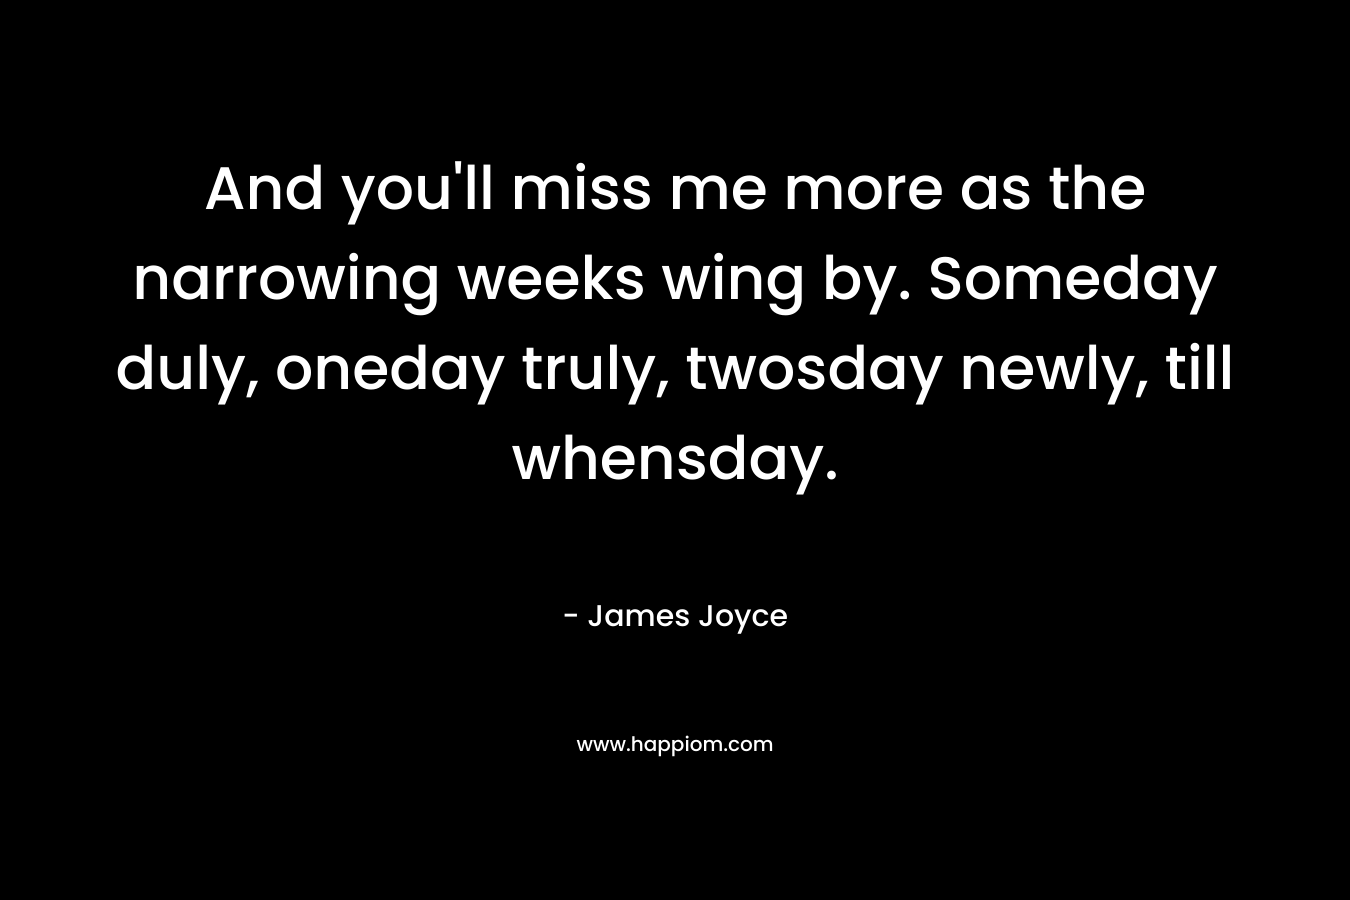 And you’ll miss me more as the narrowing weeks wing by. Someday duly, oneday truly, twosday newly, till whensday. – James Joyce